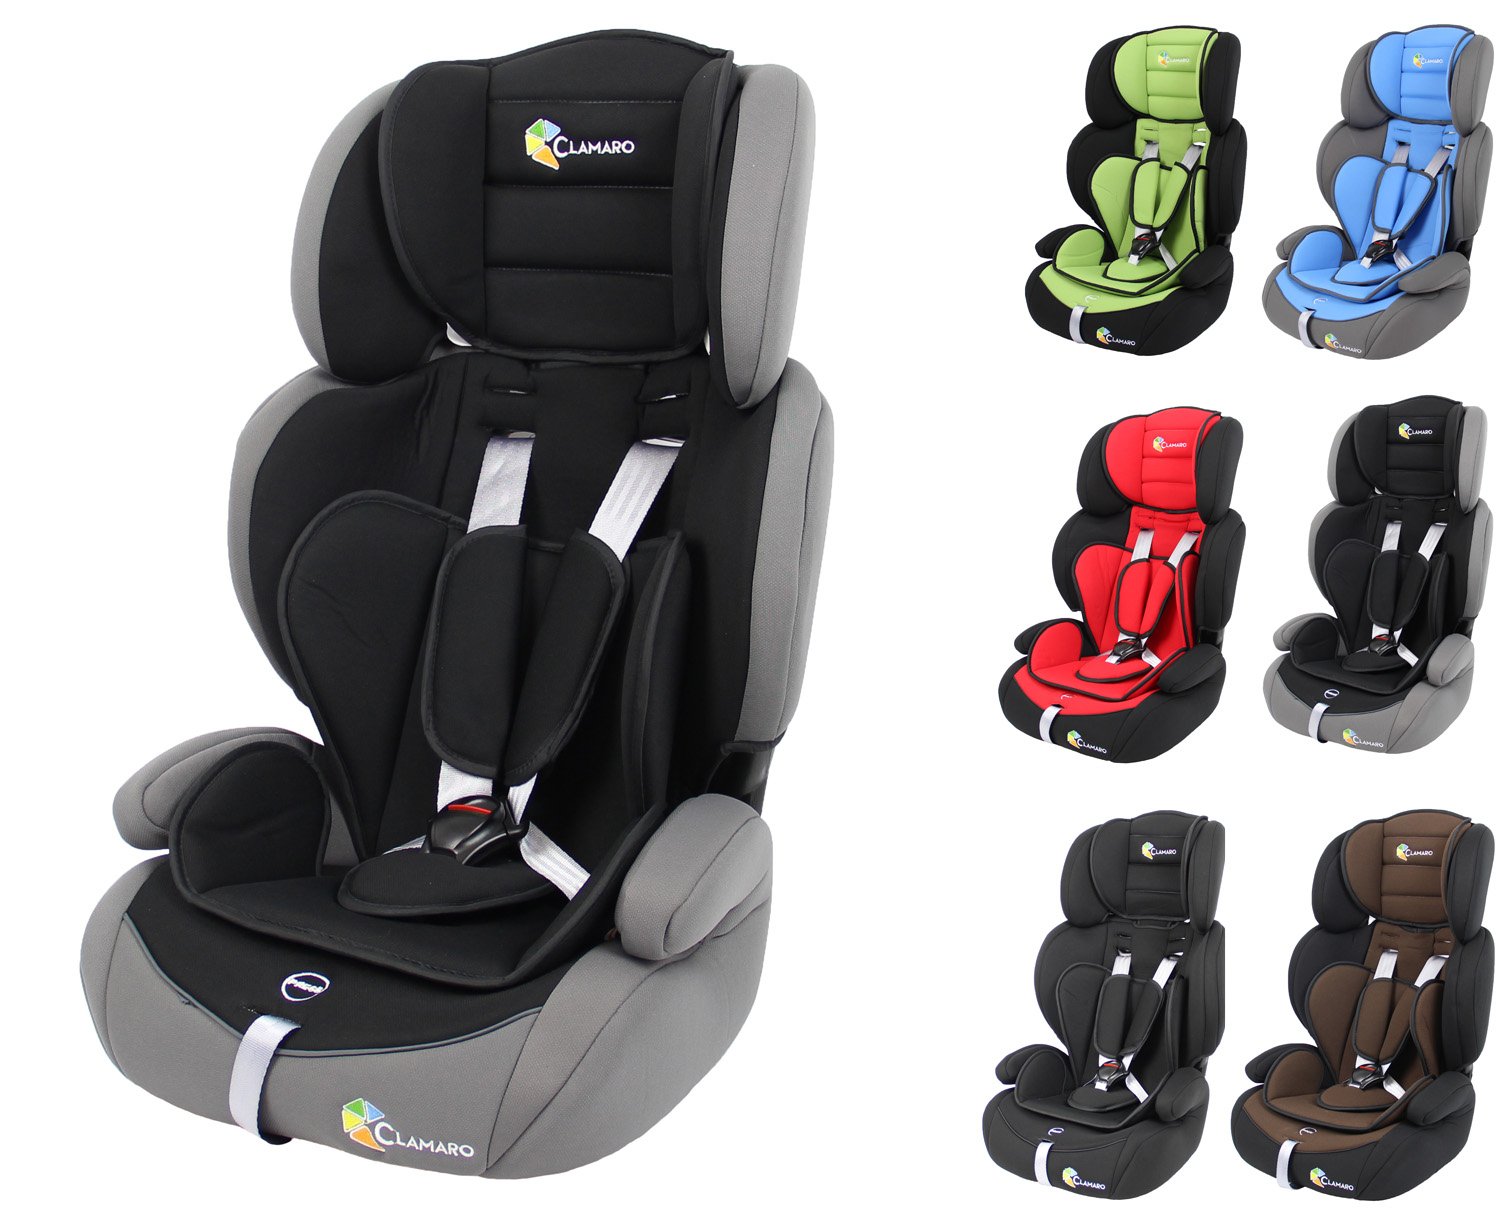 Clamaro Guardian Child Car Seat 9-36 kg Growing with Child Car Seat for Children from 1-12 Years Group 1/2/3 ECE R44/04 Grey / Black